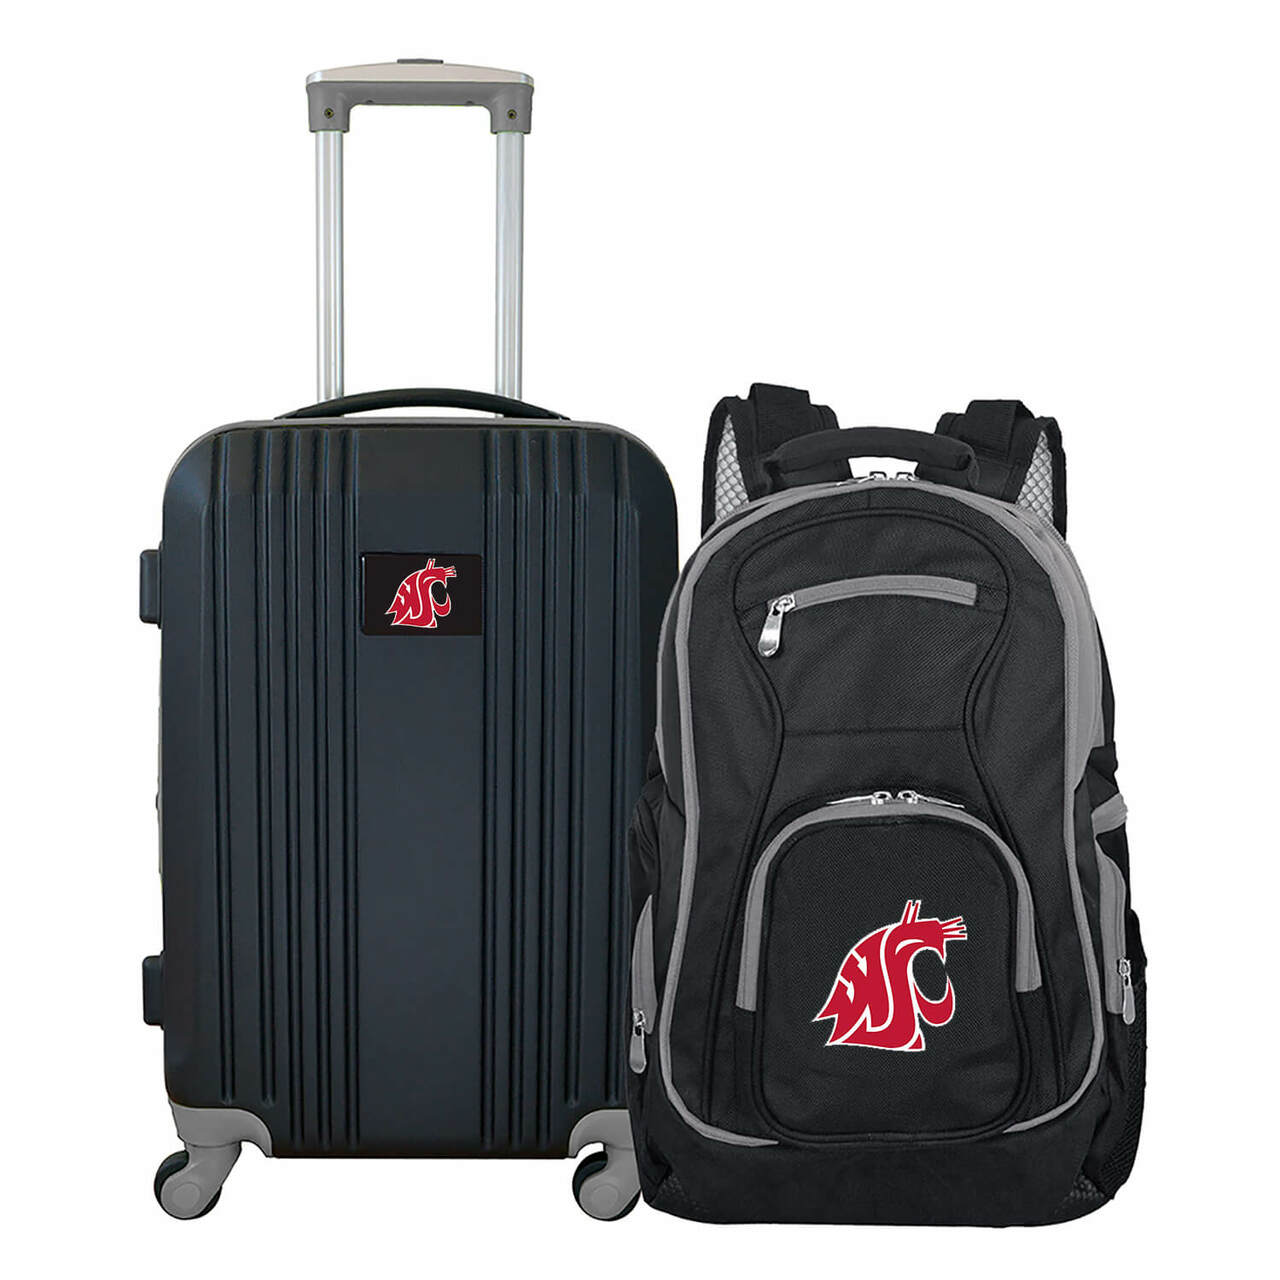 Washington State Cougars 2 Piece Premium Colored Trim Backpack and Luggage Set